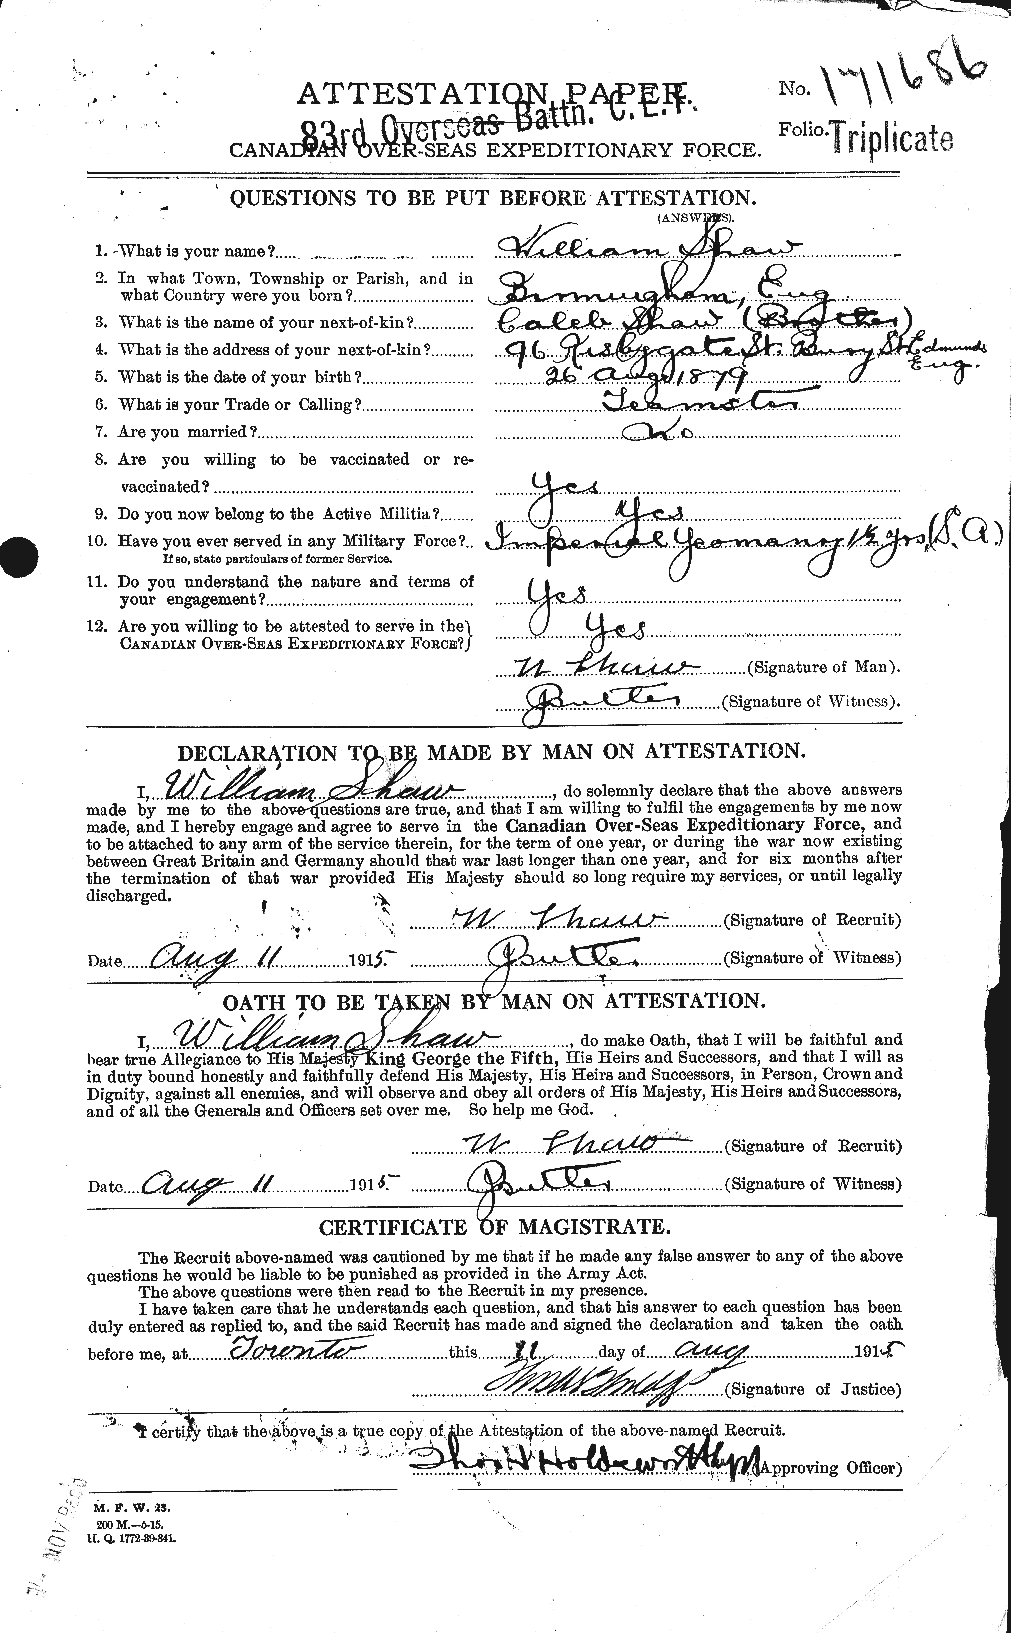 Personnel Records of the First World War - CEF 089439a